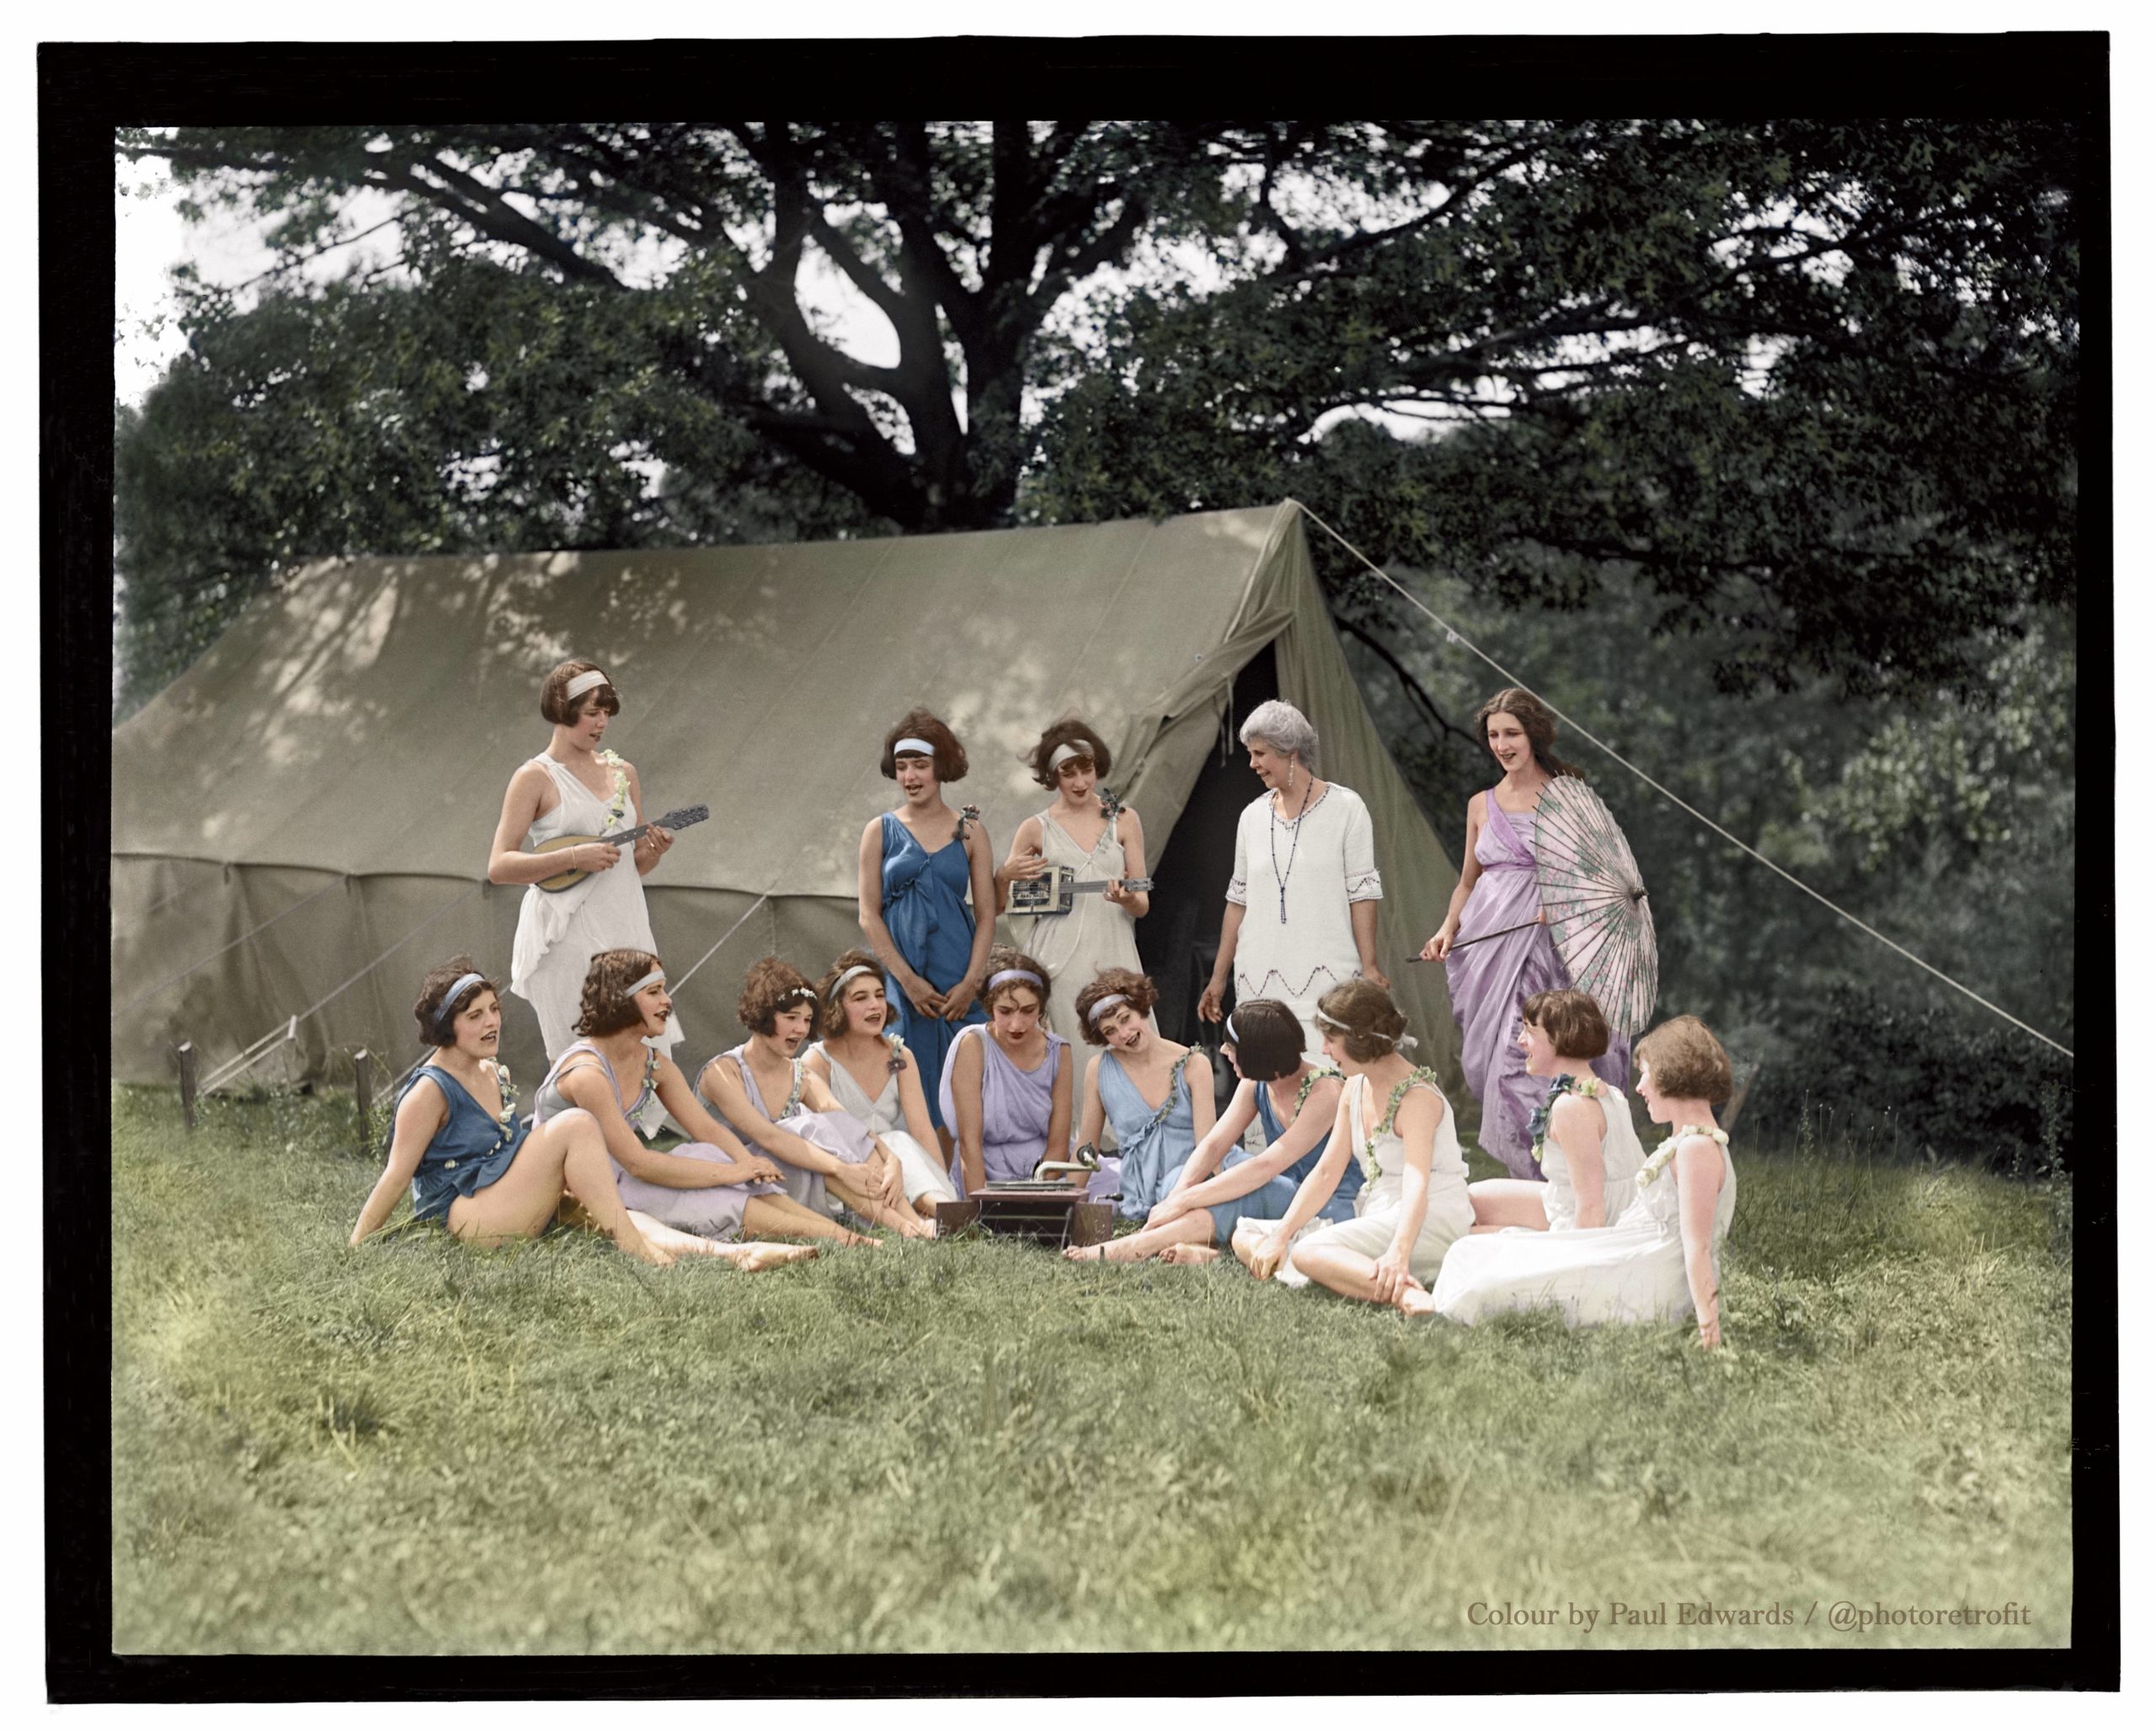 Are Colourised Photos Rewriting History?